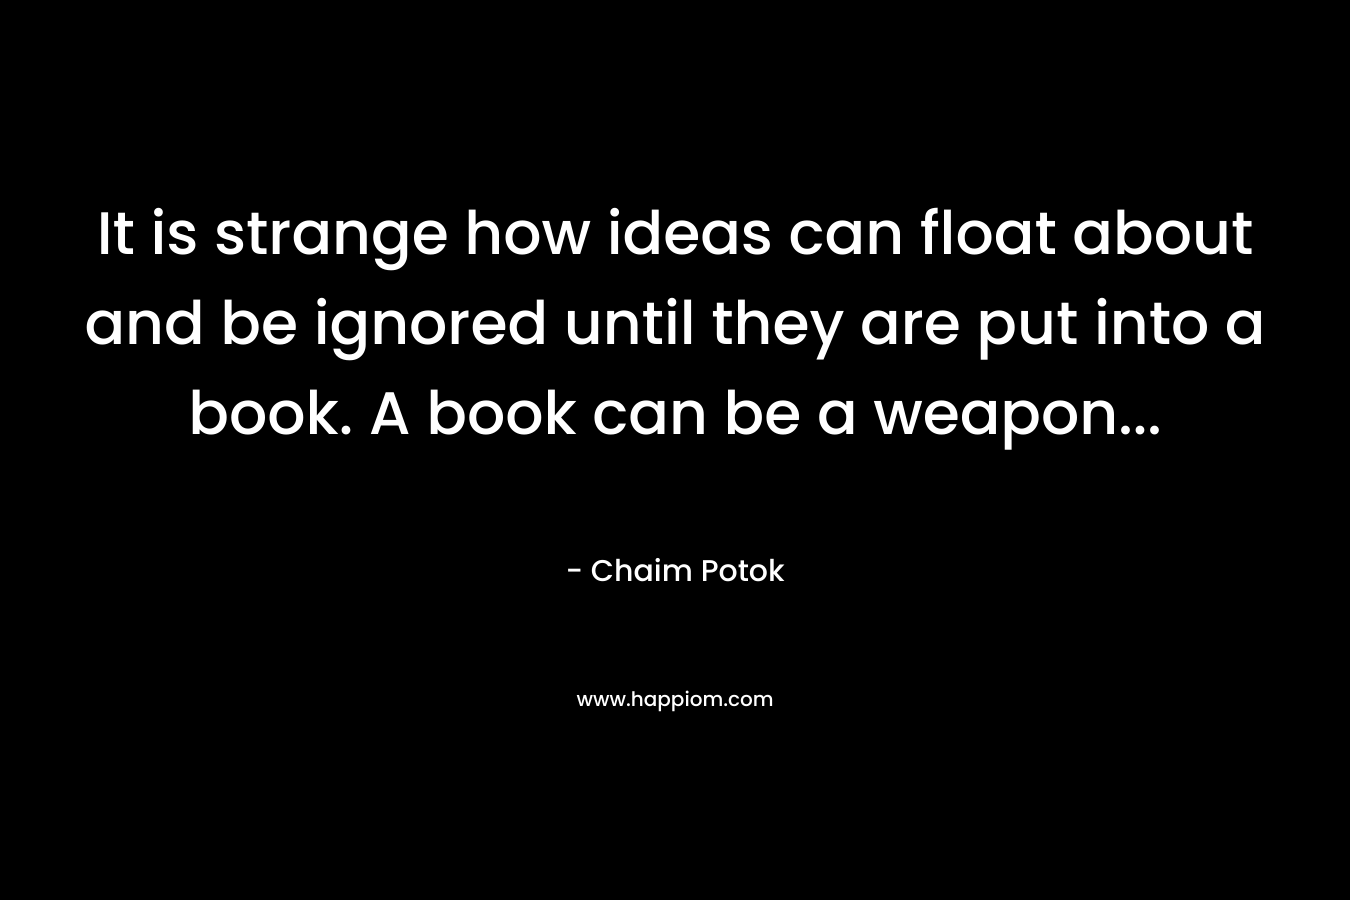 It is strange how ideas can float about and be ignored until they are put into a book. A book can be a weapon… – Chaim Potok